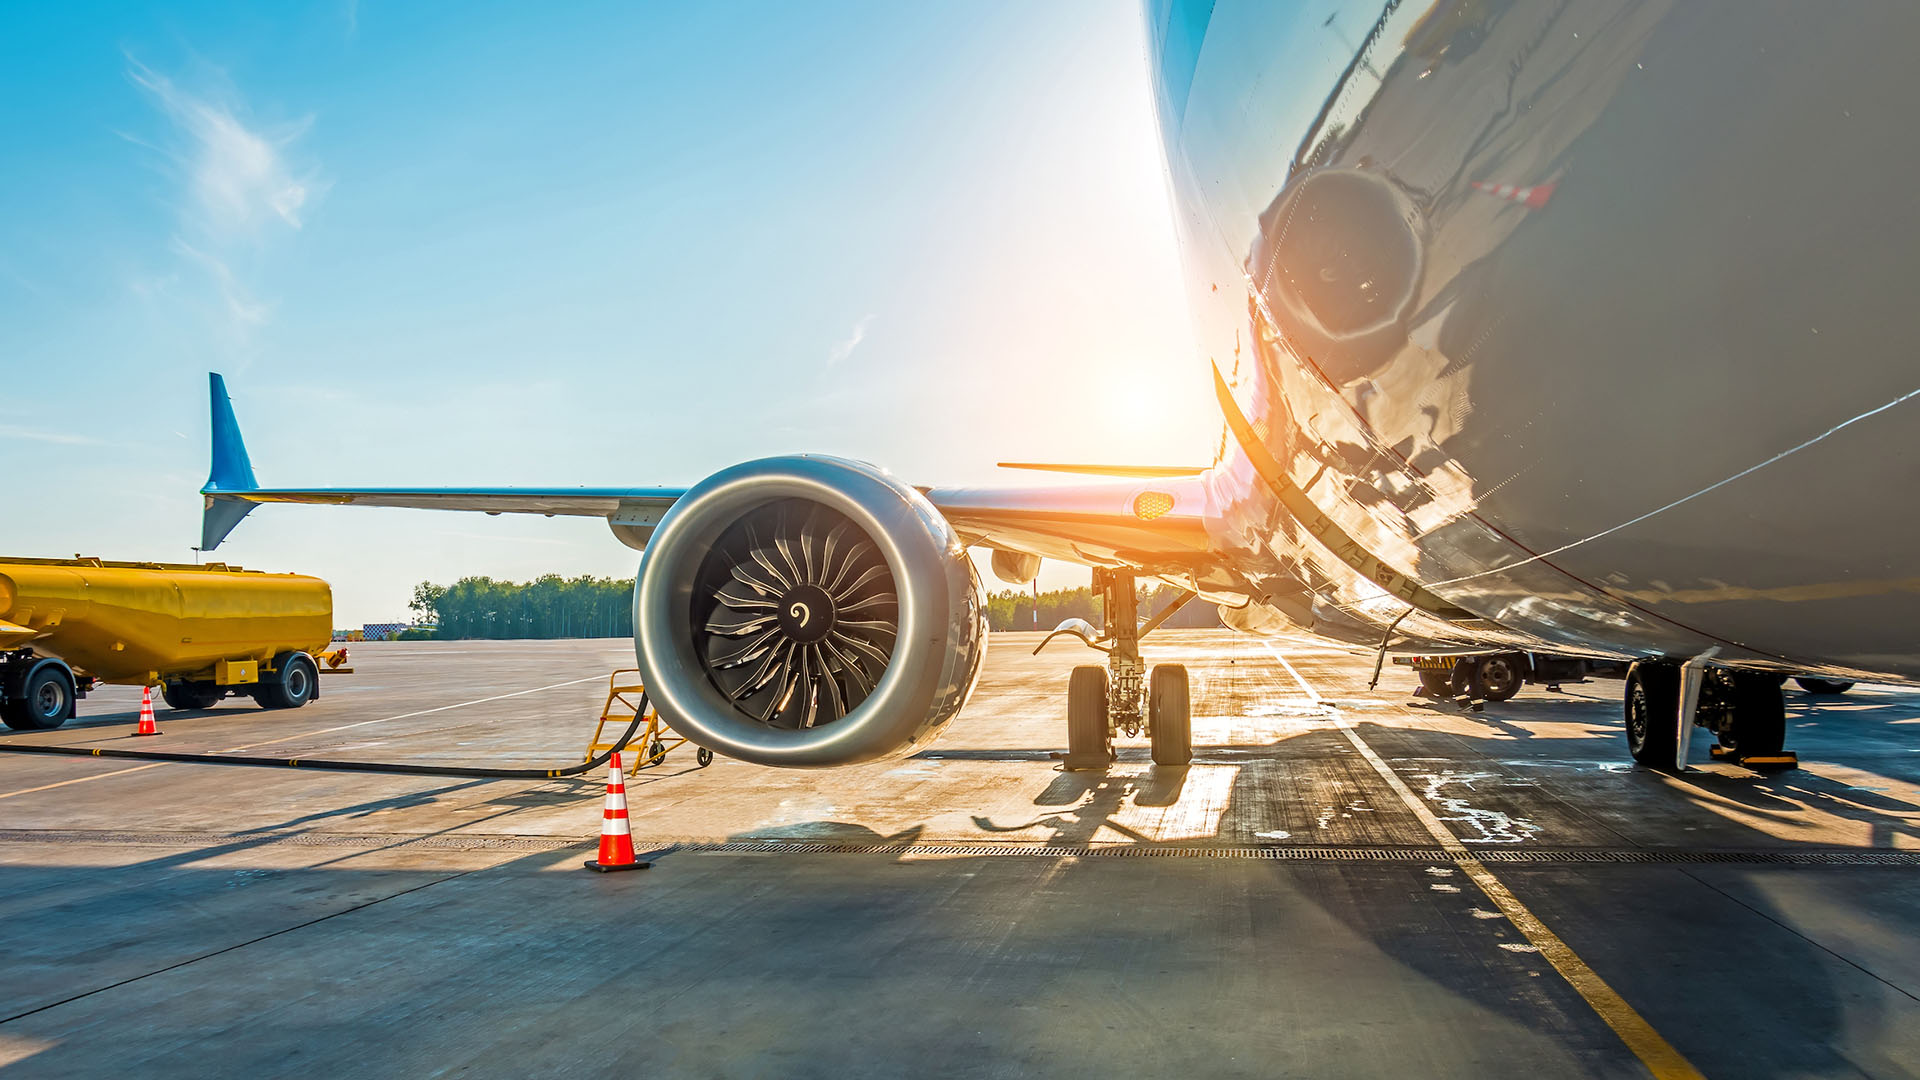 Climate-related reporting standards including the TCFD framework and their impact on the aviation industry